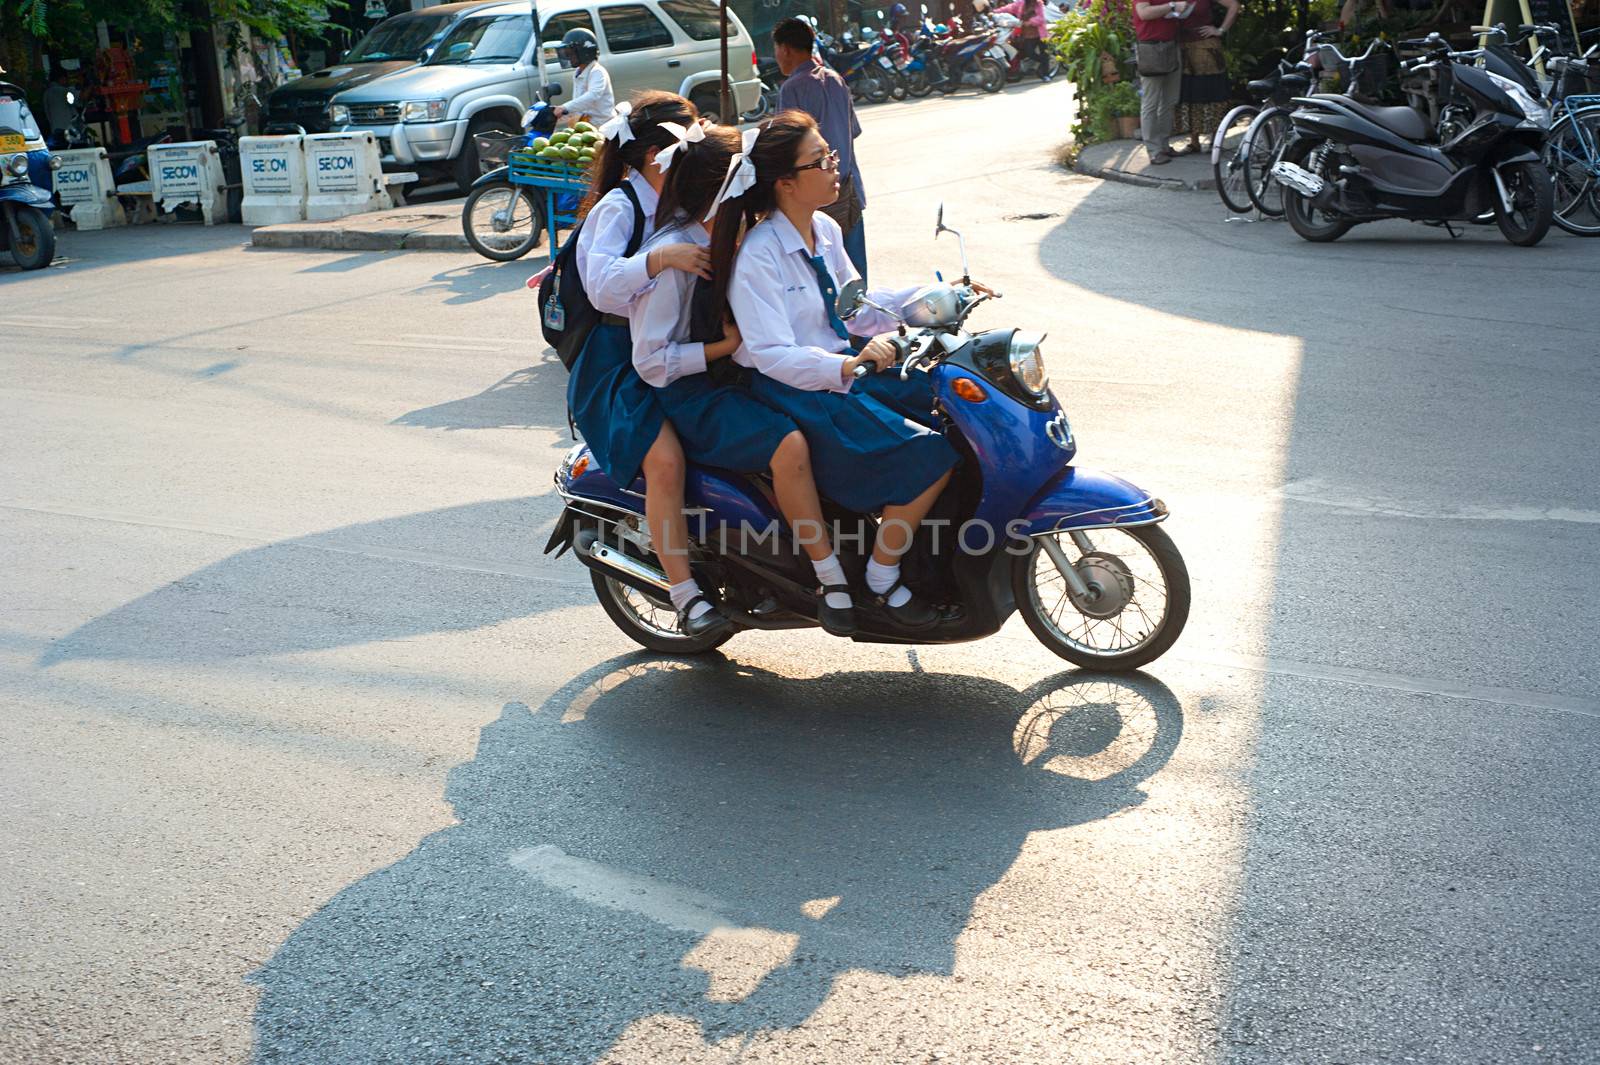 Chiang Mai, Thailand - Feb 27, 2013: Unidentified schoolgirls riding by motorbike in Chiang Mai, Thailand. Motorbike is the most popular and available transportation in South Asia.